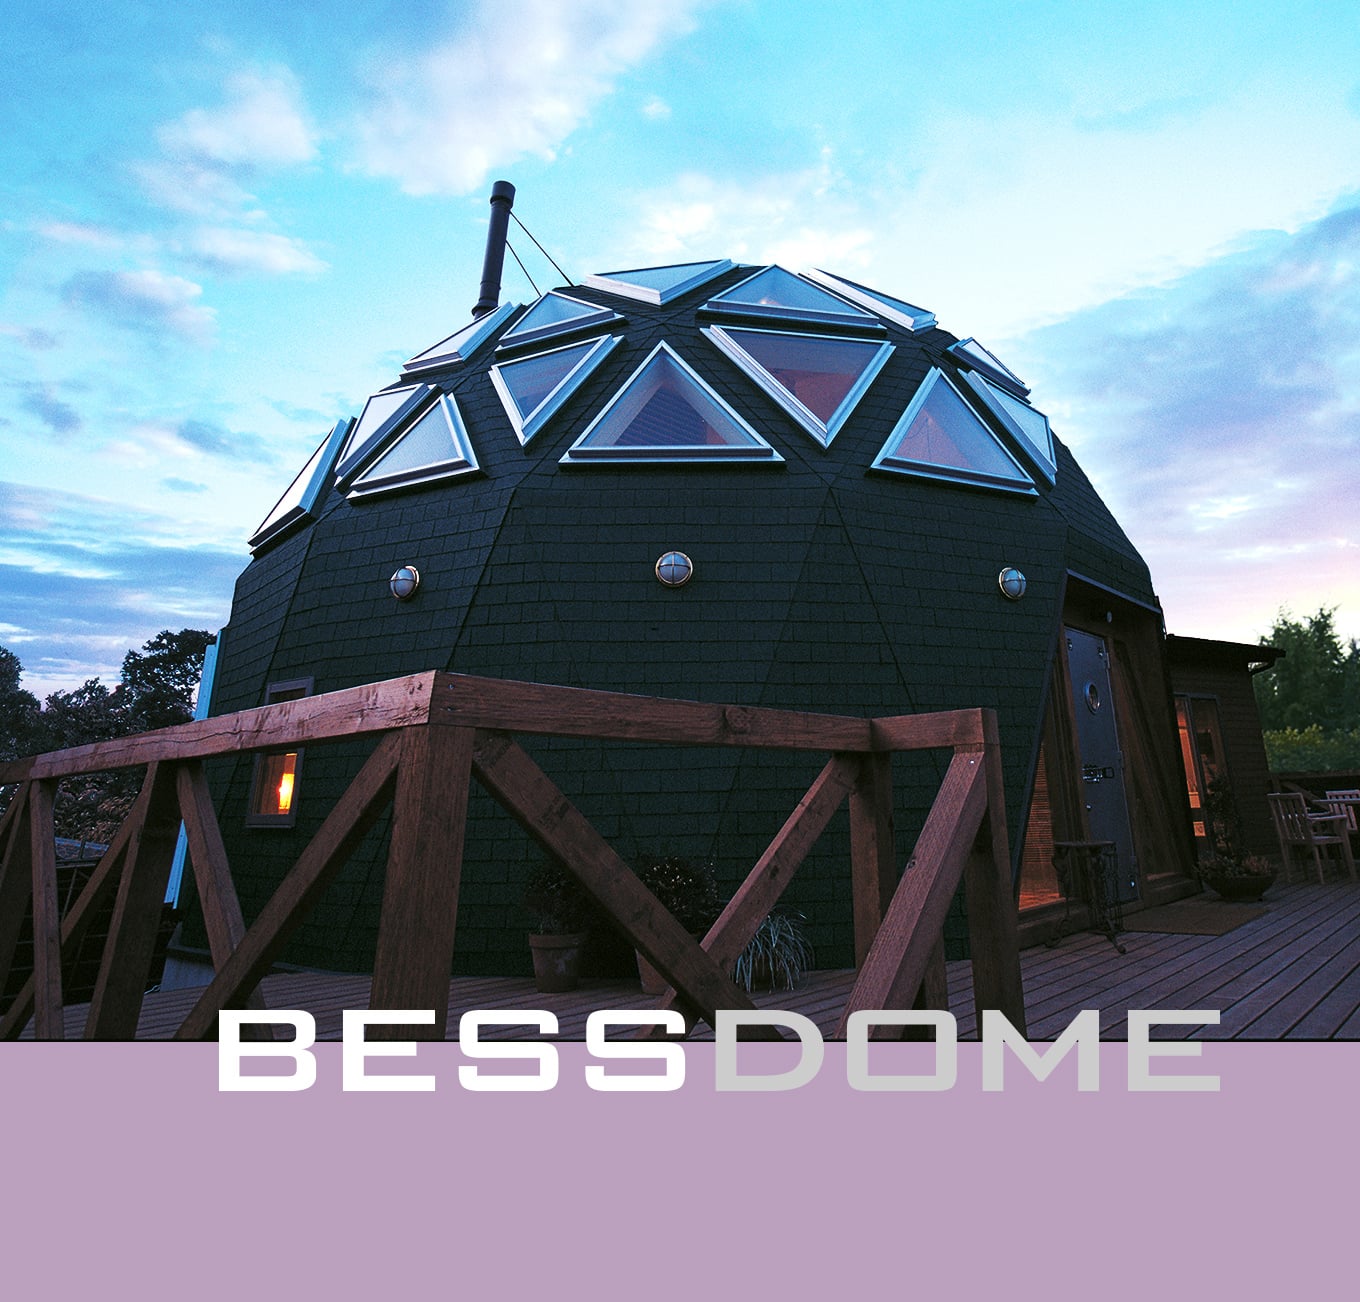 BESS DOME